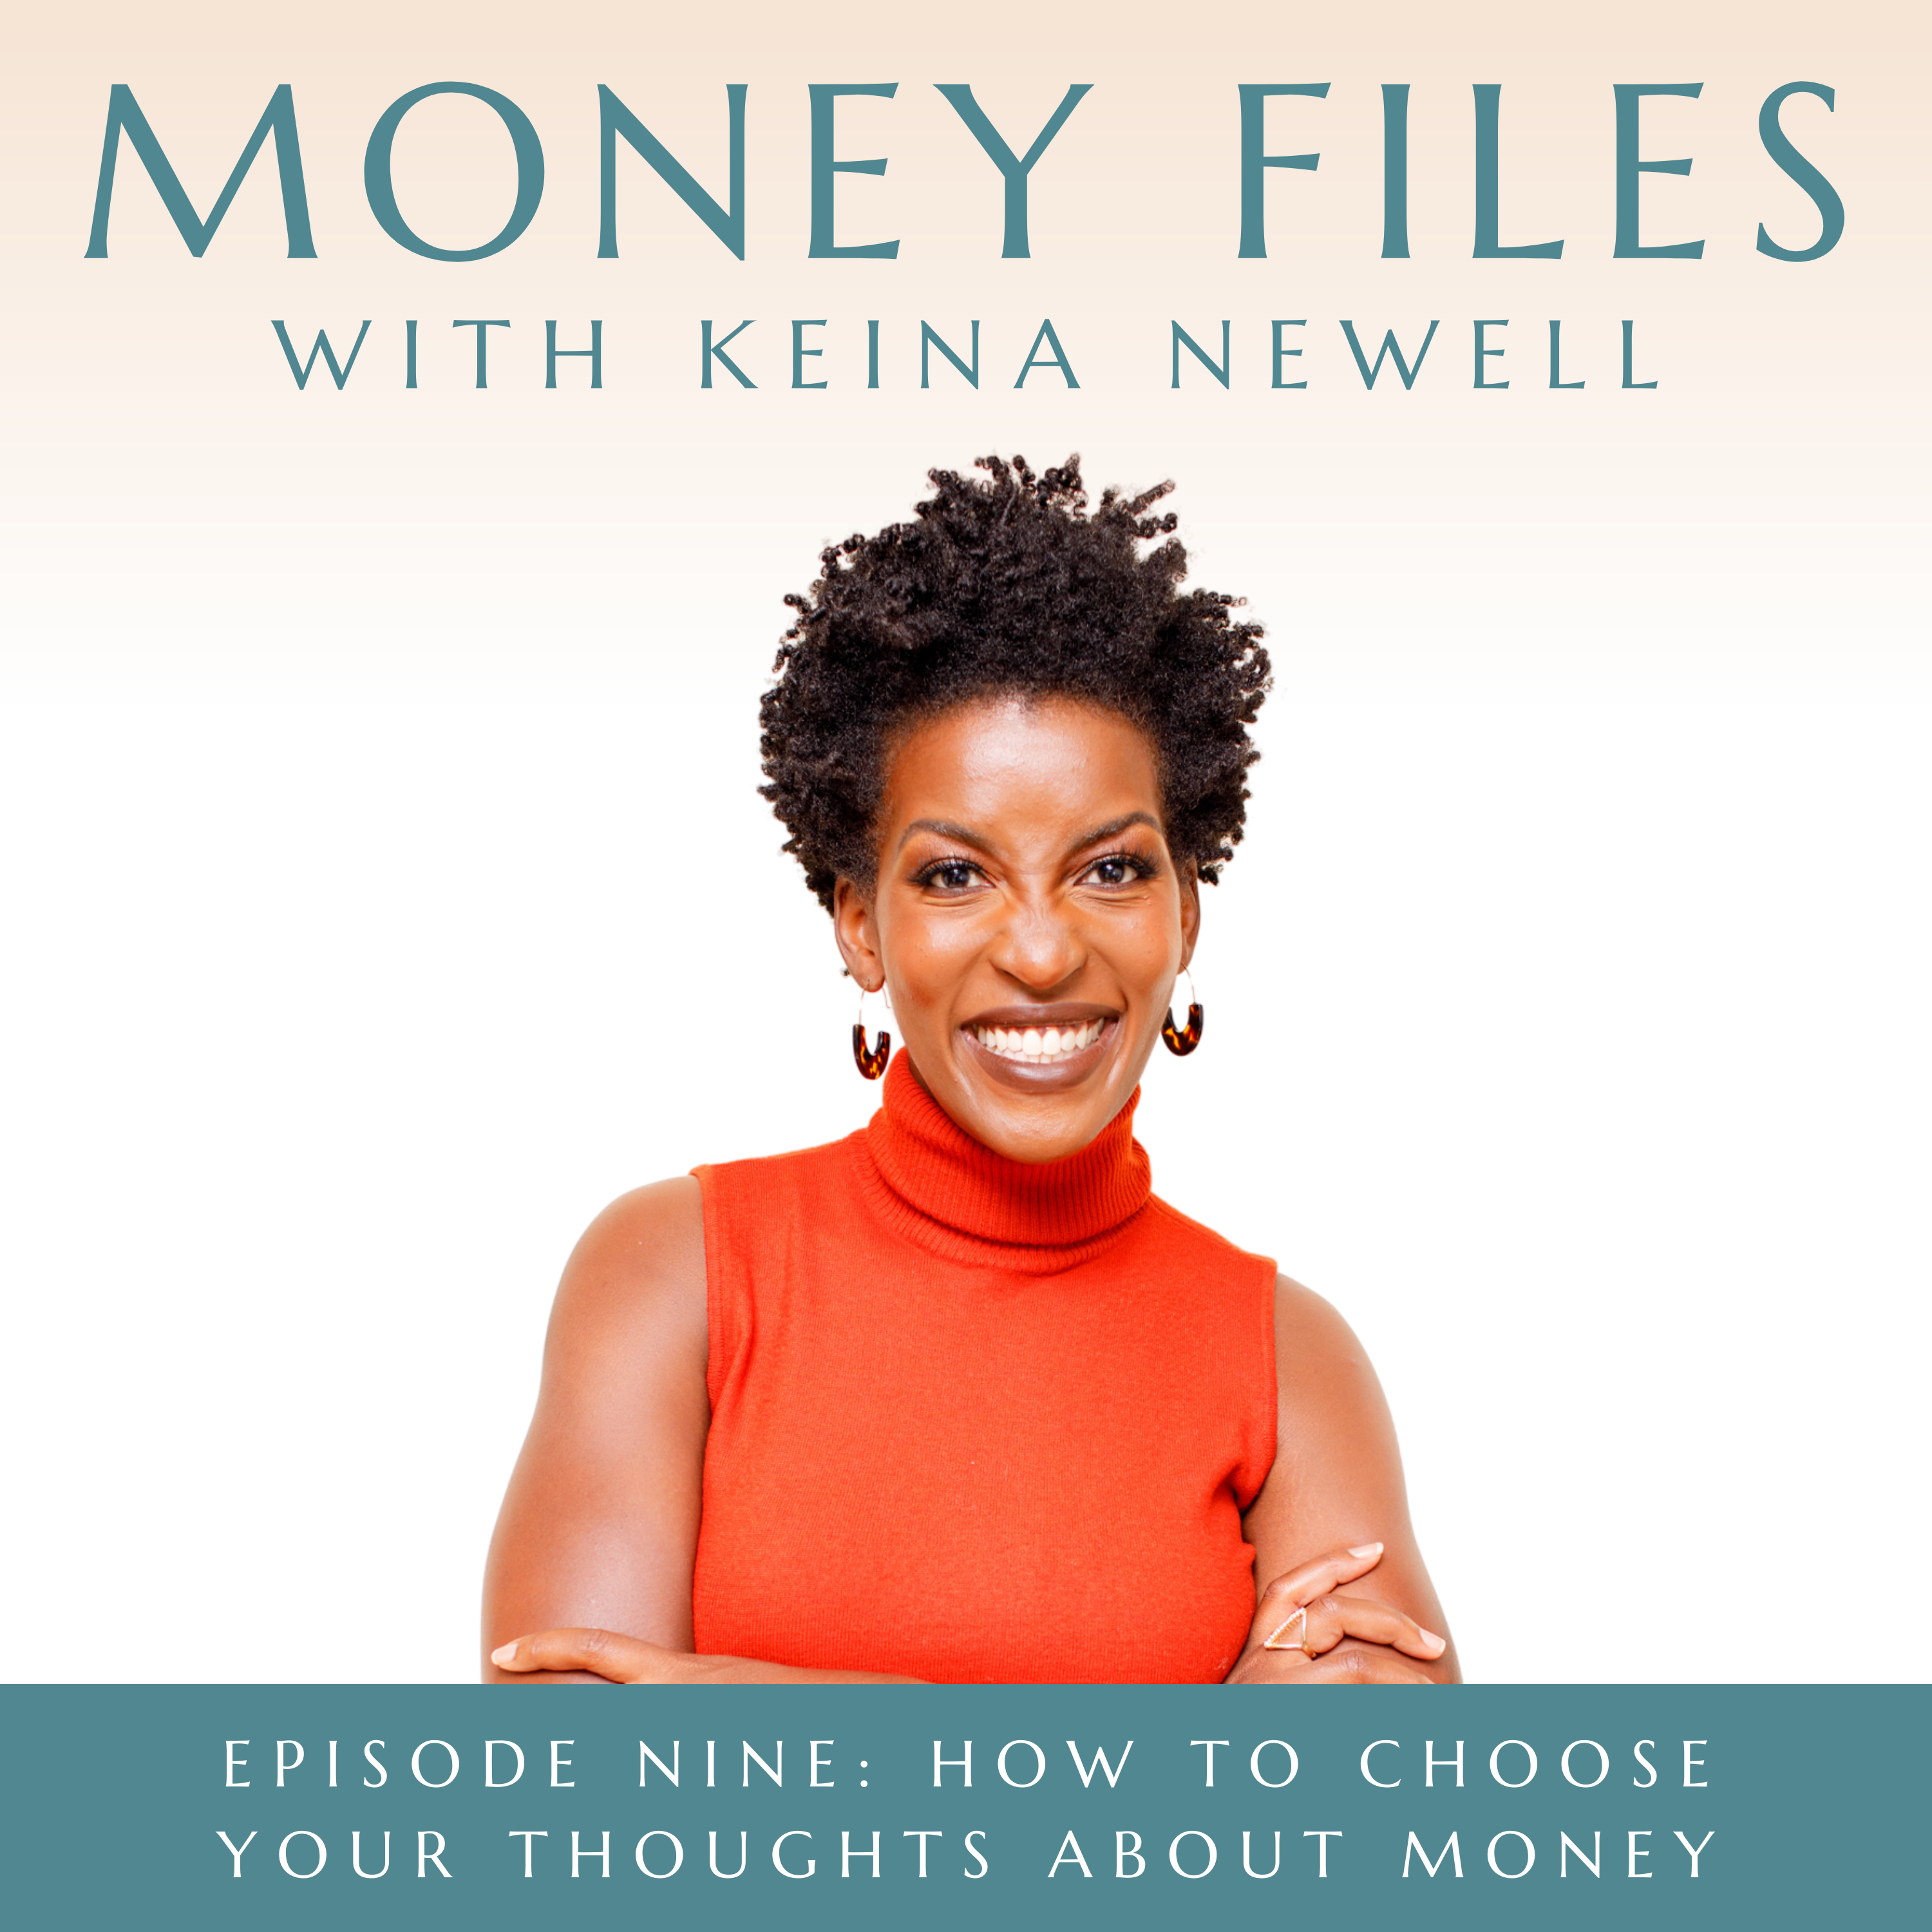 How to Choose Your Thoughts About Money